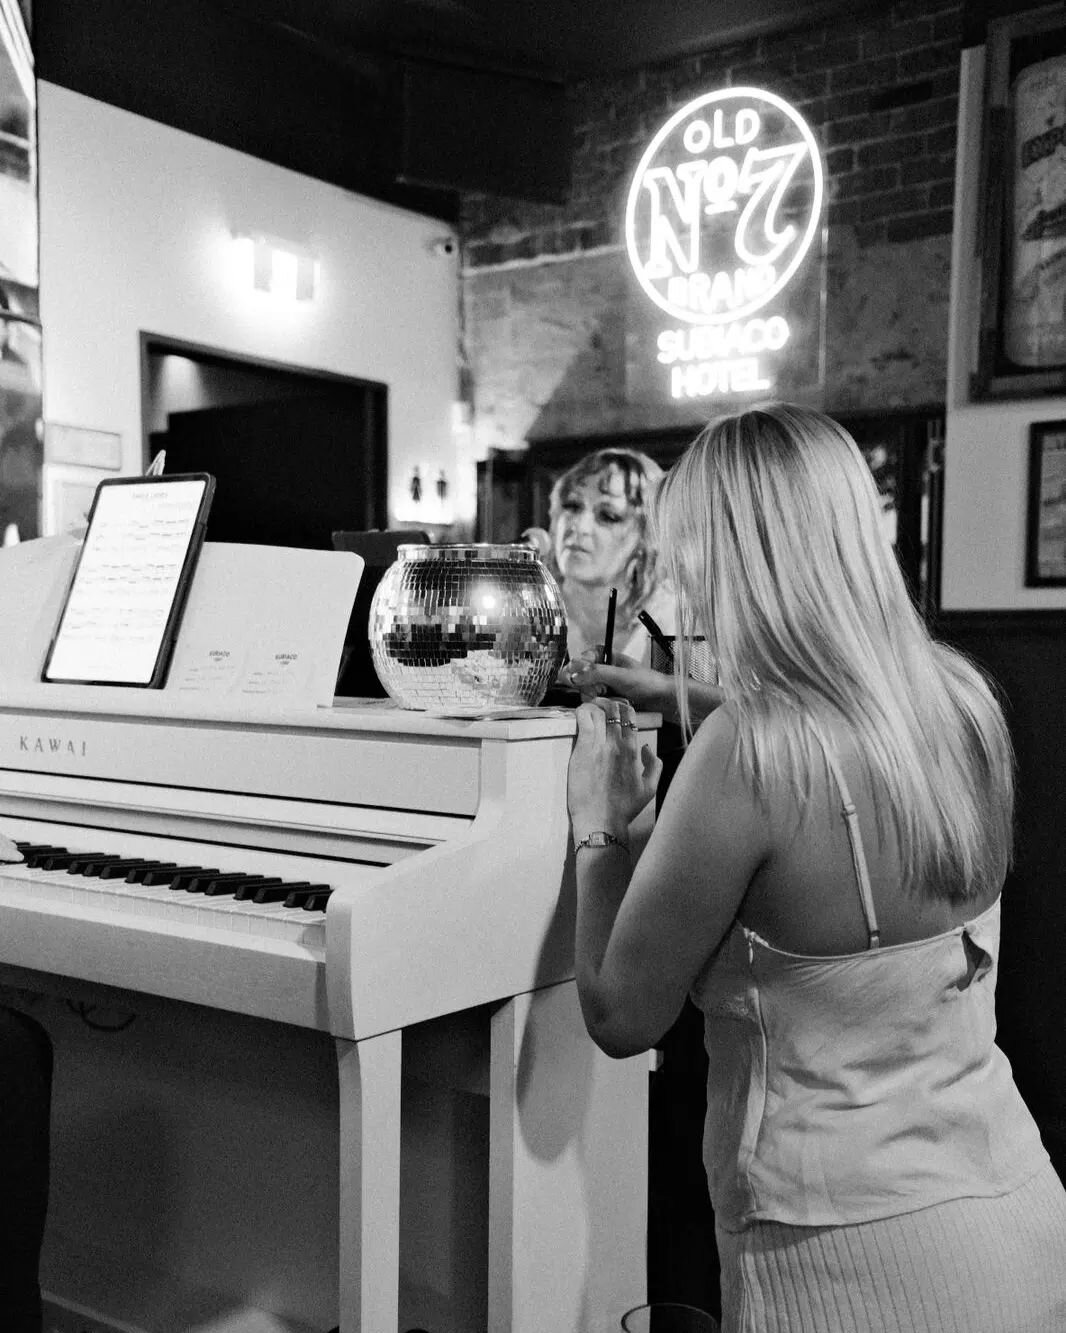 Head over to the subi this weekend for our live music showdown!&nbsp;🎹 

☆ Friday, 5pm - 8pm: @ruzellcurita 

☆ Friday, 9pm - 1am: @geminimusicperth 

☆ Saturday, 8:30pm - 12:45am: DUELLING PIANOS with @sgt.hulka_ &amp; @stujohnsmusic

☆ Sunday, 1pm